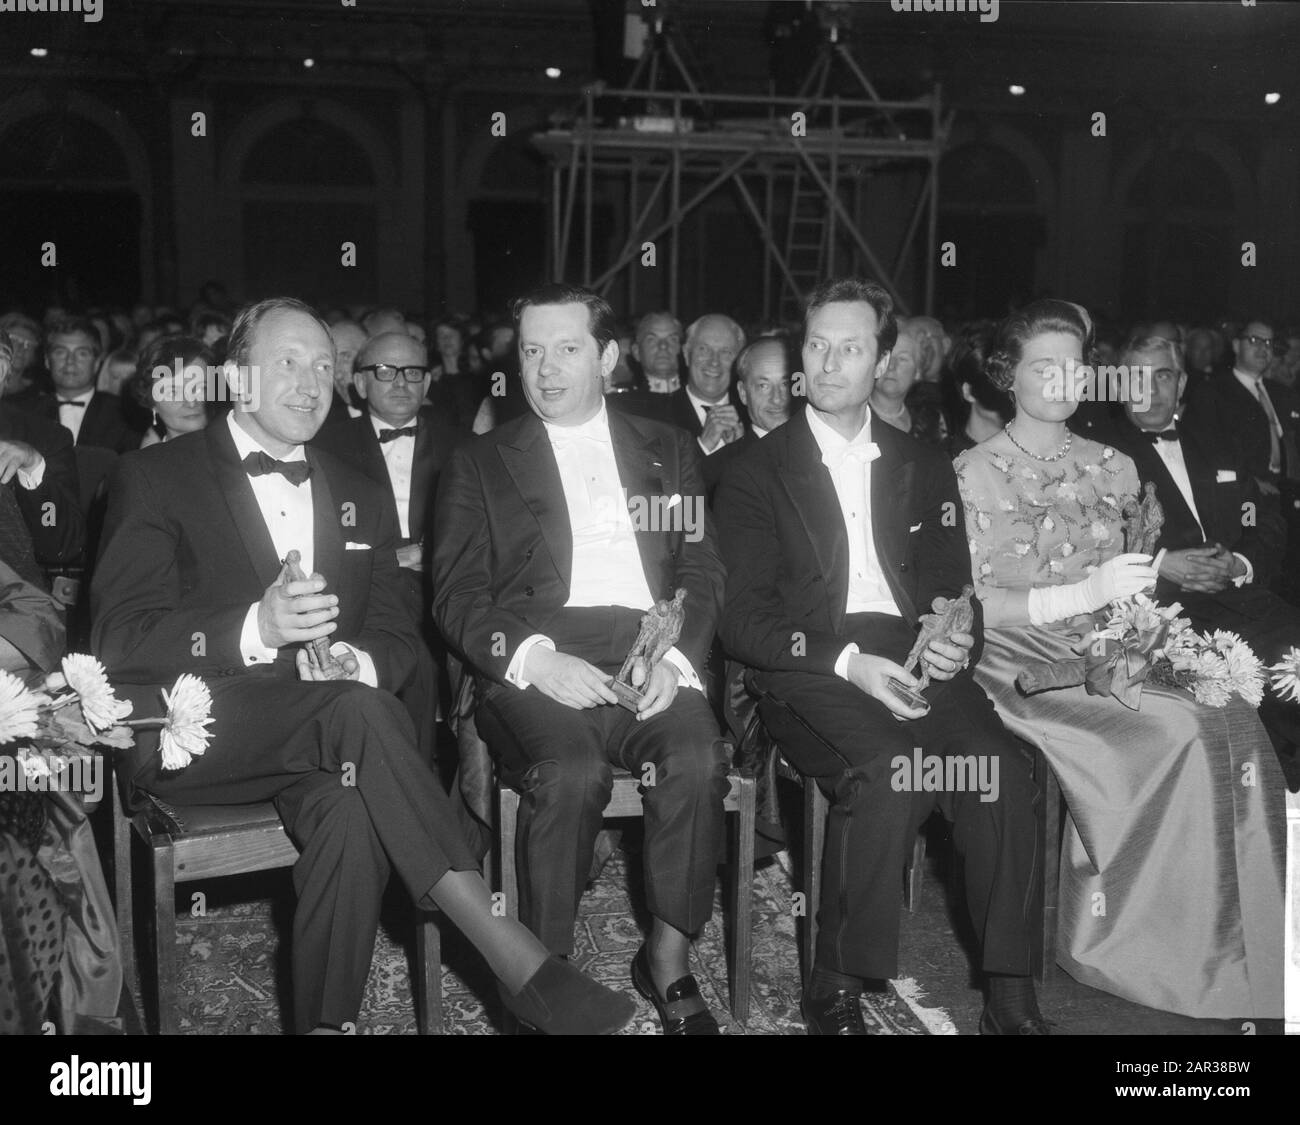 Grand Gala du Disque Classique 1965 in the Concertgebouw in Amsterdam  Four Edison winners; v.l.n.r. violinists Herman Krebbers and Arthur Grumiaux, conductor Carlo Maria Giulini and Mrs. Soames (daughter of Winston Churchill) Date: 29 October 1965 Location: Amsterdam, Noord-Holland Keywords: classical music, musicians, awards, awards person: Giulini, Carlo Maria, Grumiaux, Arthur, Krebbers, Herman, Soames, Mary Stock Photo